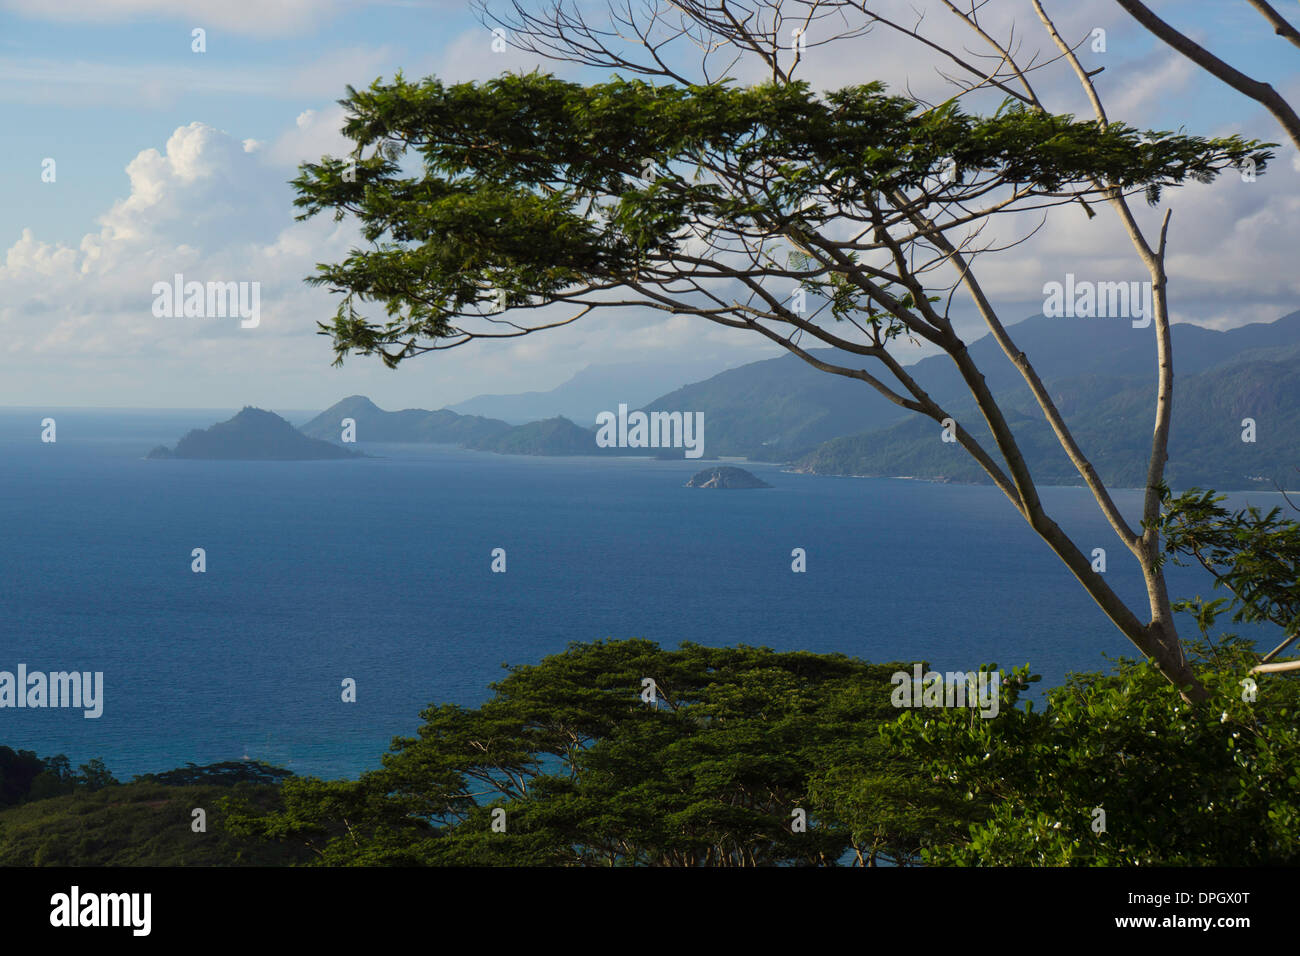 Landscape with mountains and trees, Mahe, Seychelles, Indian Ocean, Africa - December 2013 Stock Photo